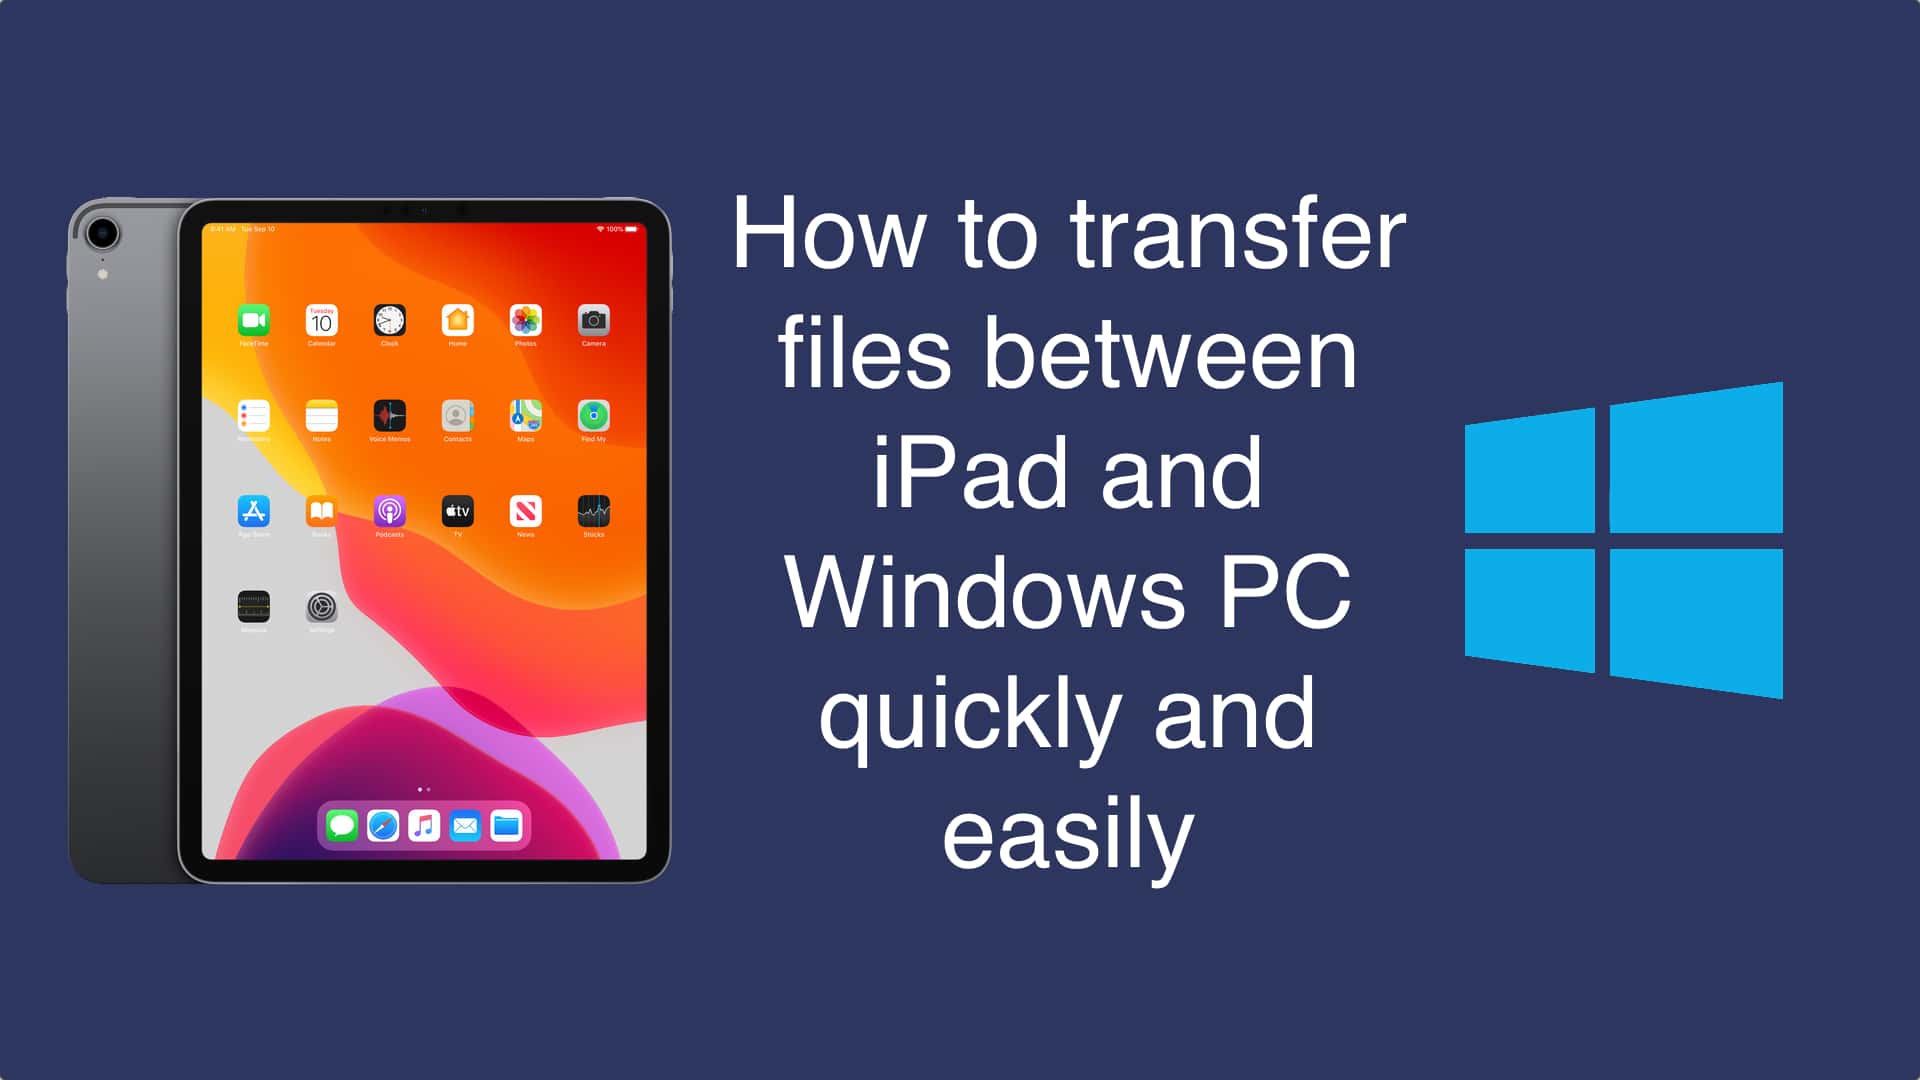 download photos from ipad to computer windows 10